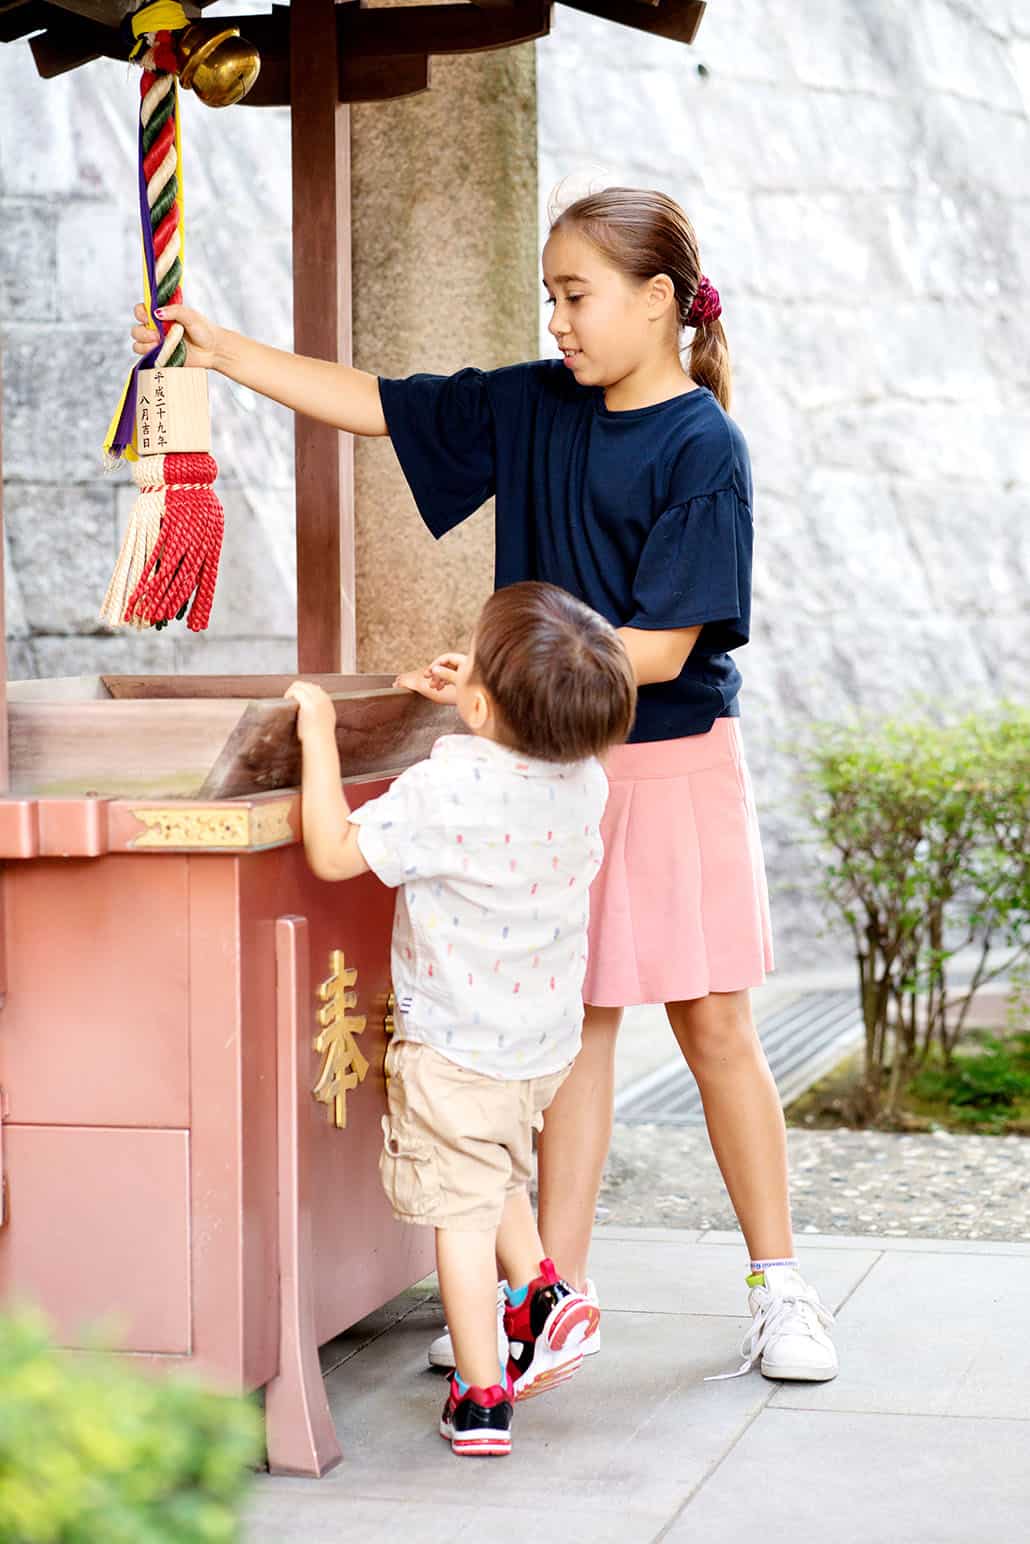 Sister and brother pull the bell rope at a Buddhist temple in Nishinomiya, Japan, photographed by central NJ family photographer Kyo Morishima